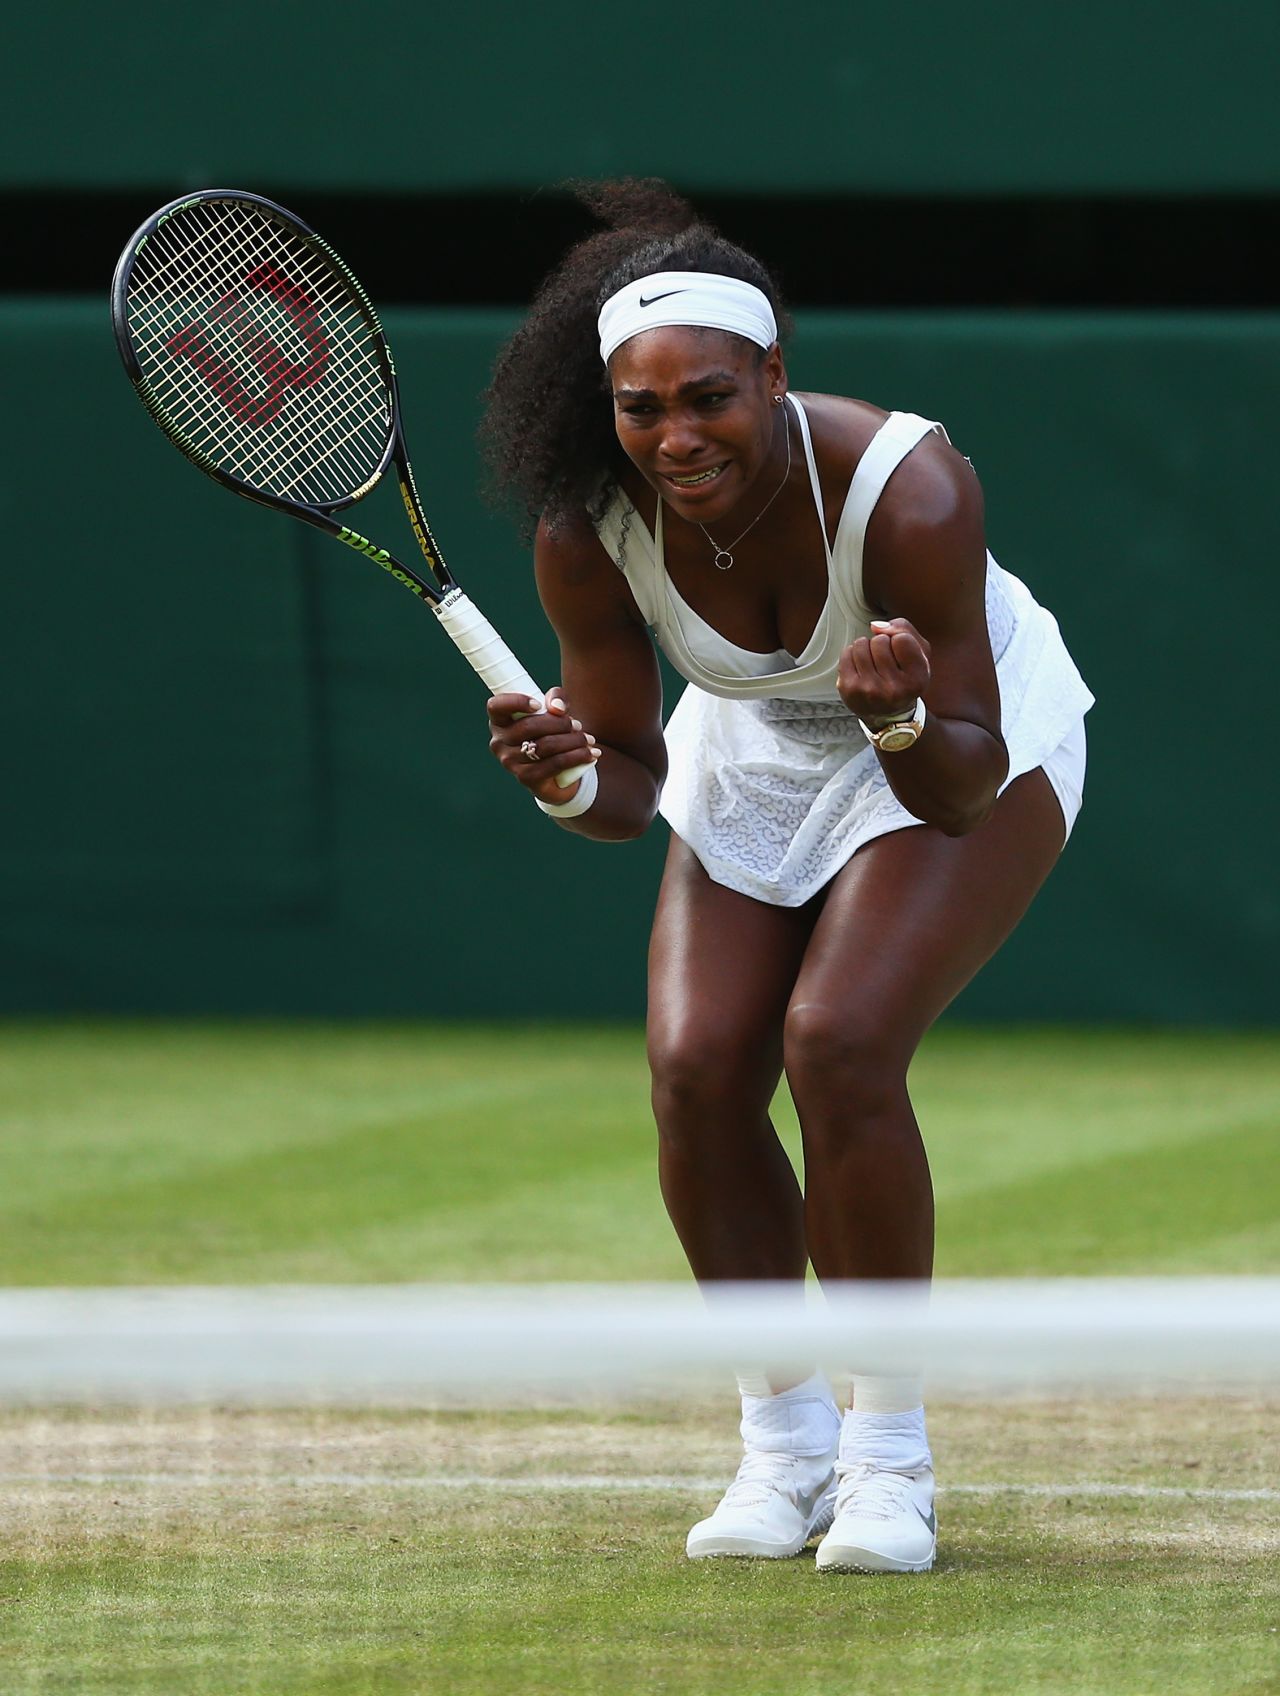 But Williams is hard to put away, and she proved it once again, winning the third set 7-5. The "Serena Slam" and the calendar-year slam are thus still possibilities. 